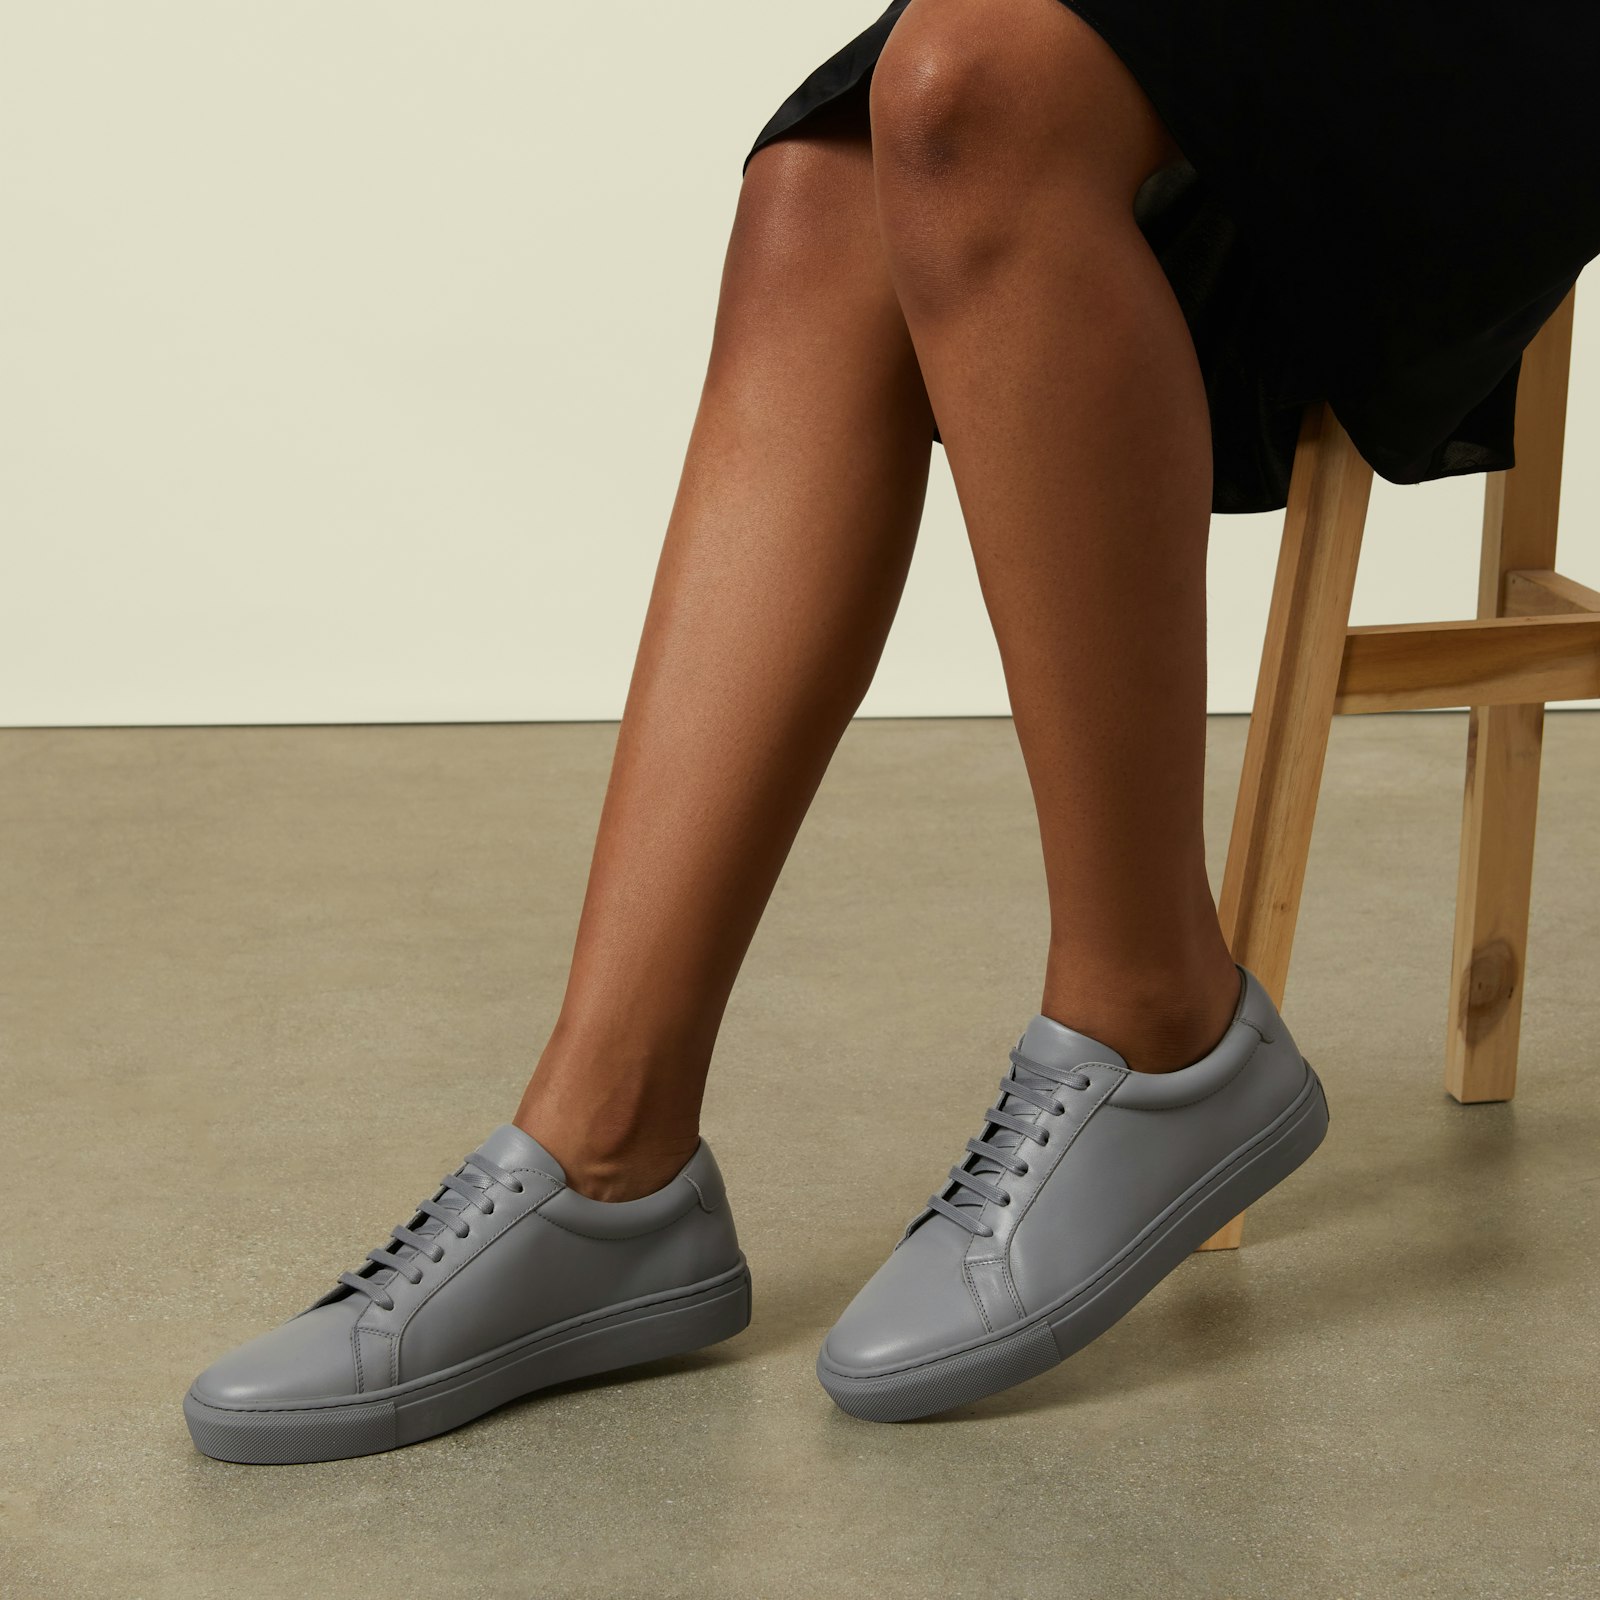 Candace_LeatherSneaker_Graphite_Figure_CropScale.jpg